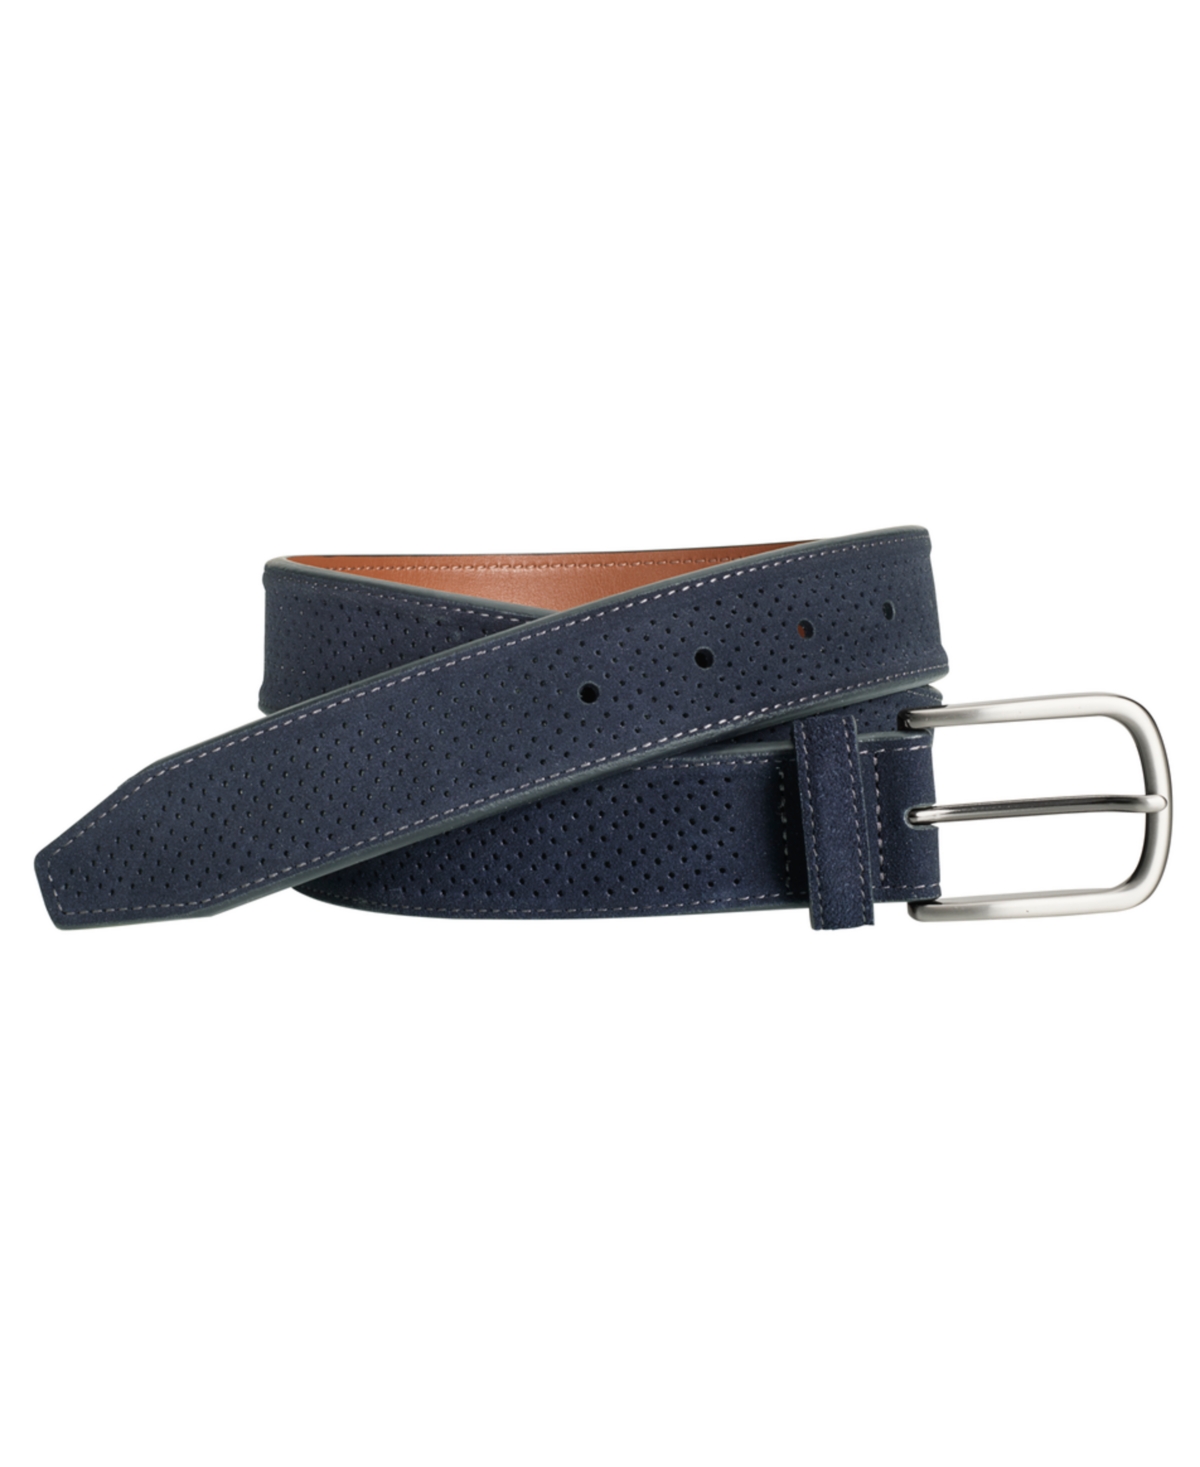 Perfed Suede Belt - Gray